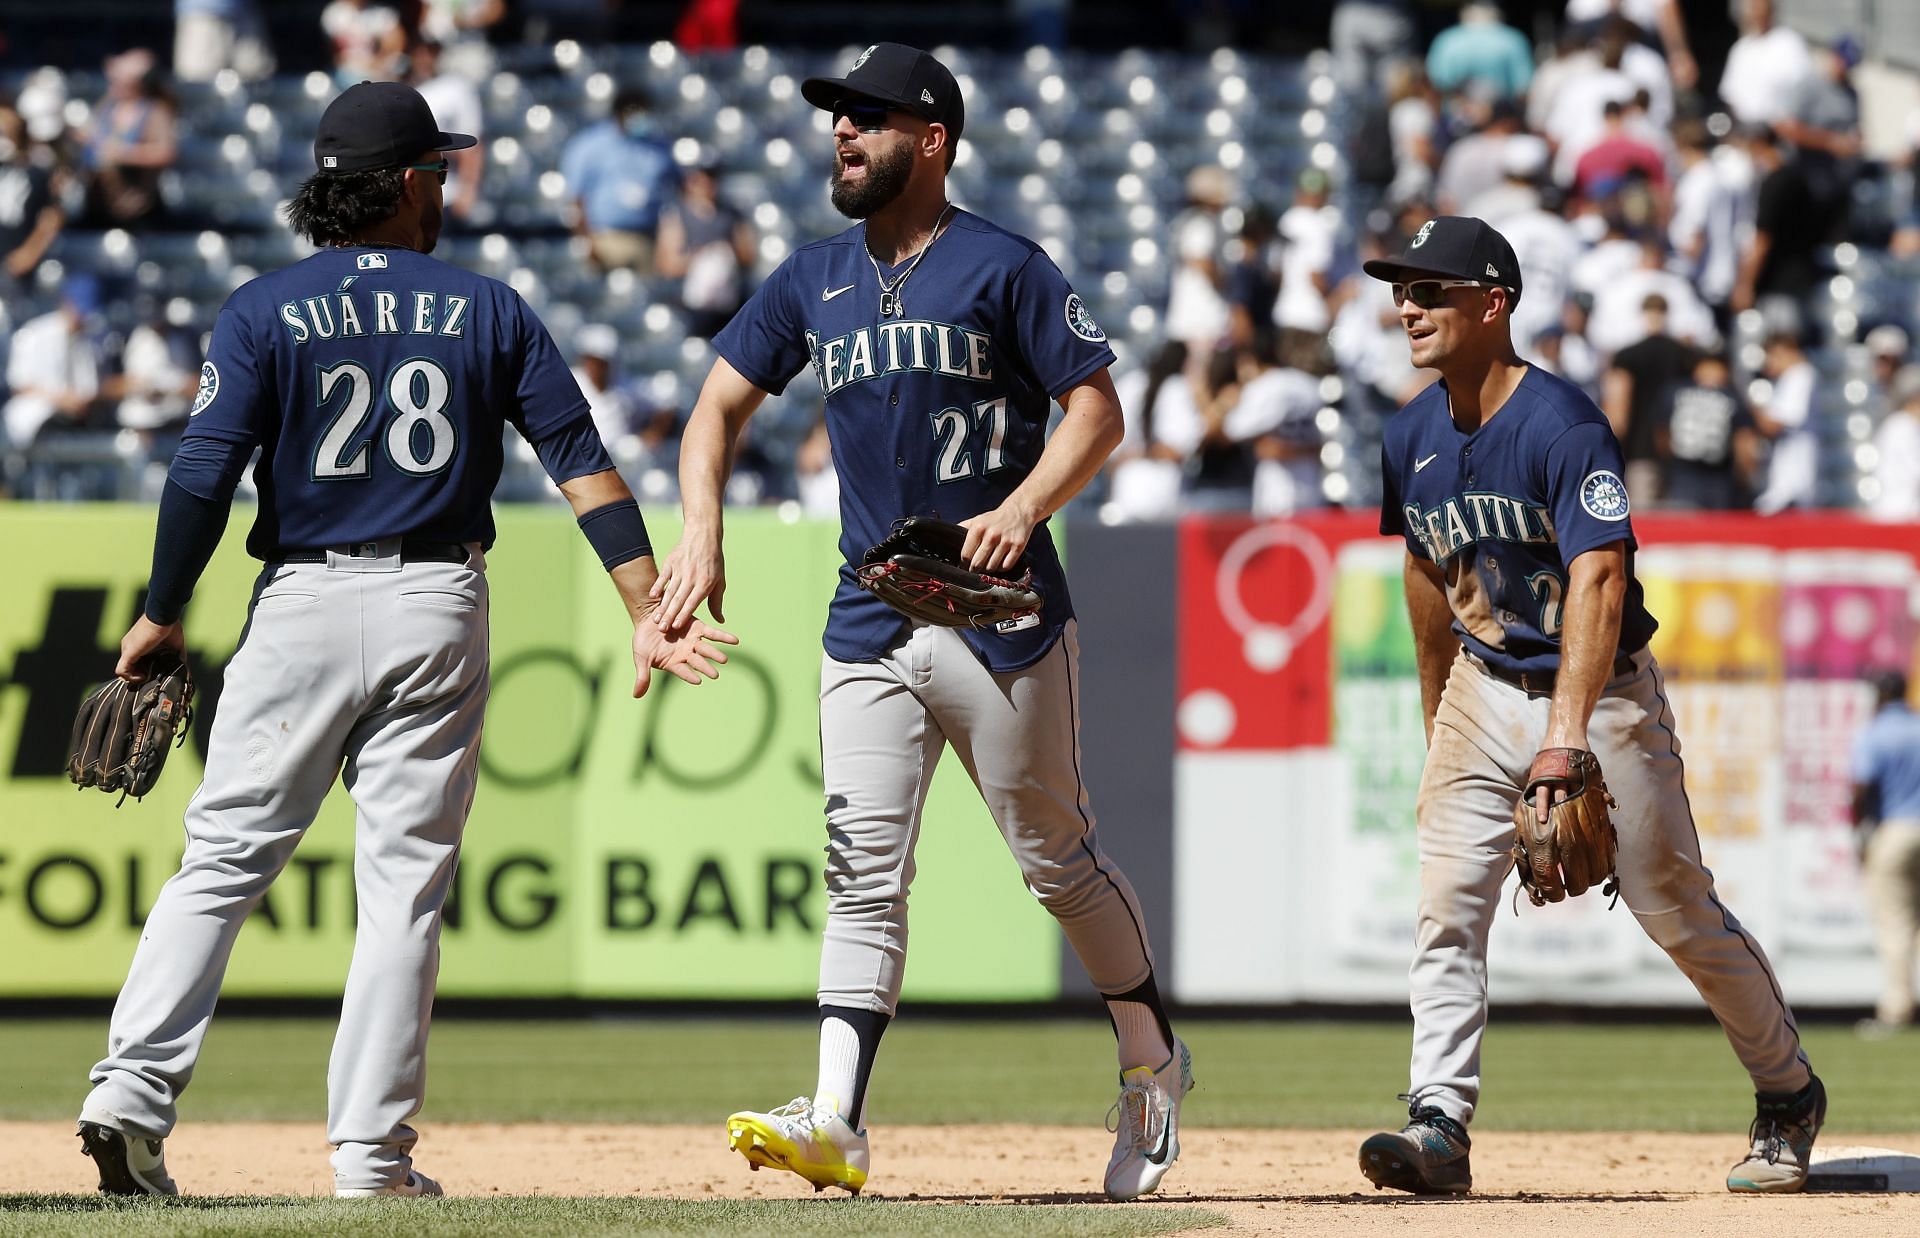 The Mariners recently took their series versus the Yankees in New York.